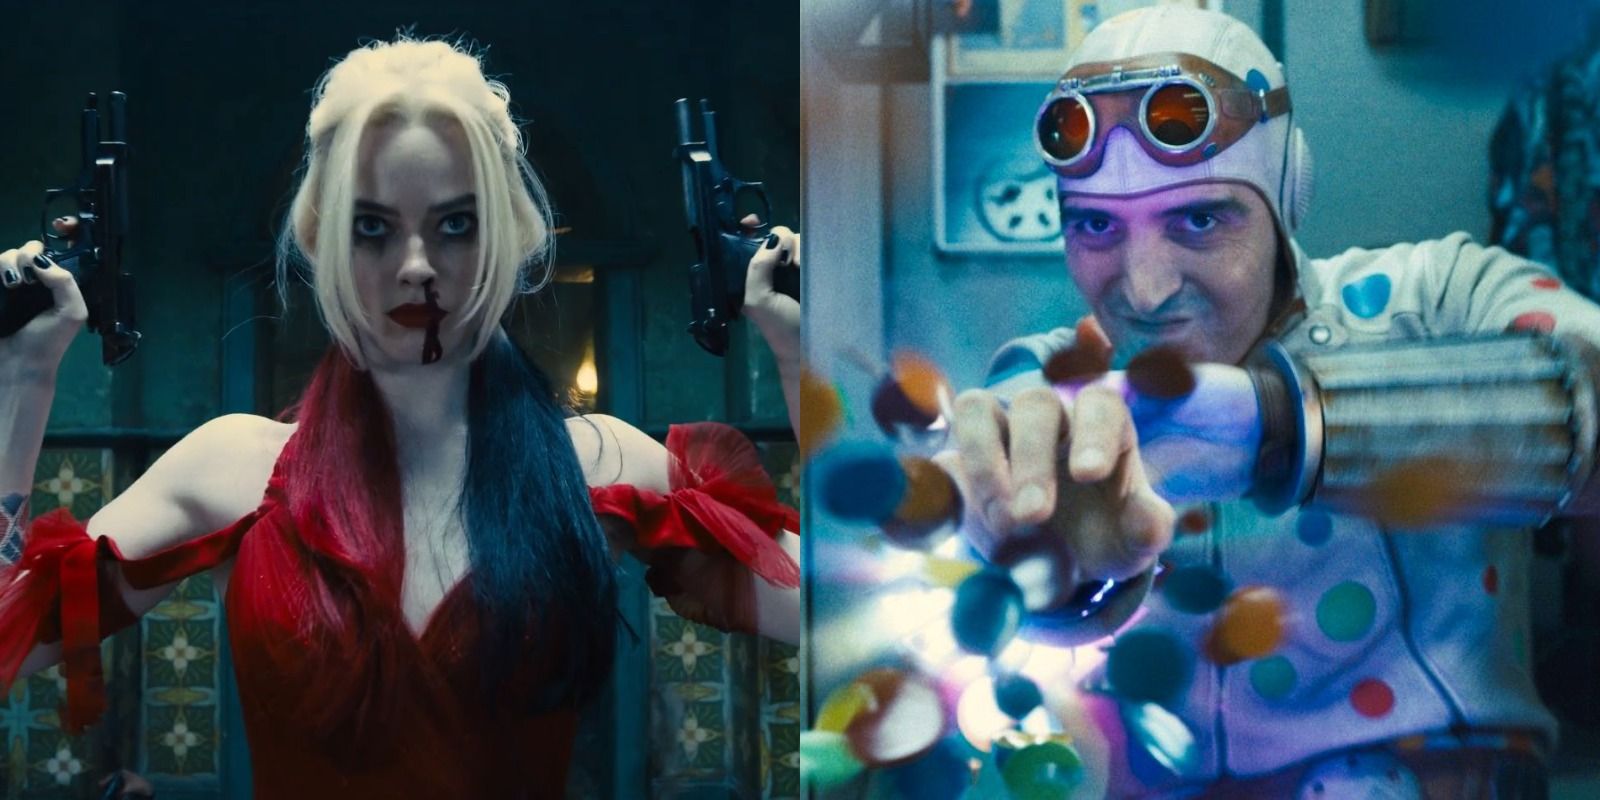 Suicide Squad: The Main Characters Ranked By Power & Influence